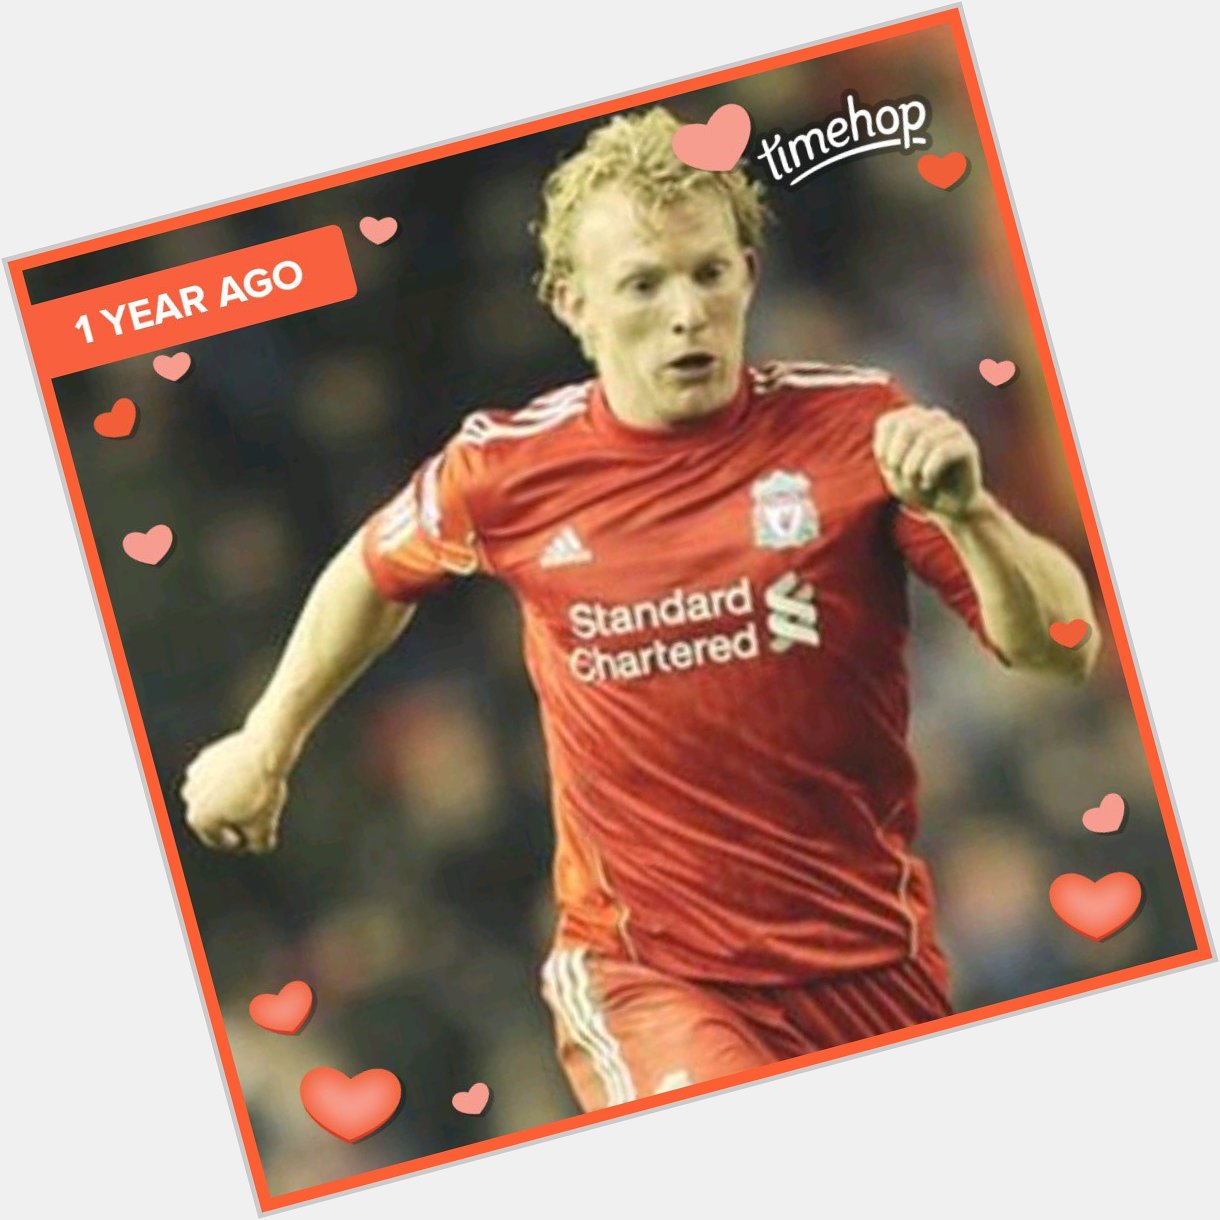 Happy 37th birthday dirk kuyt hope you have a brill day YNWA Liverpool Legend        